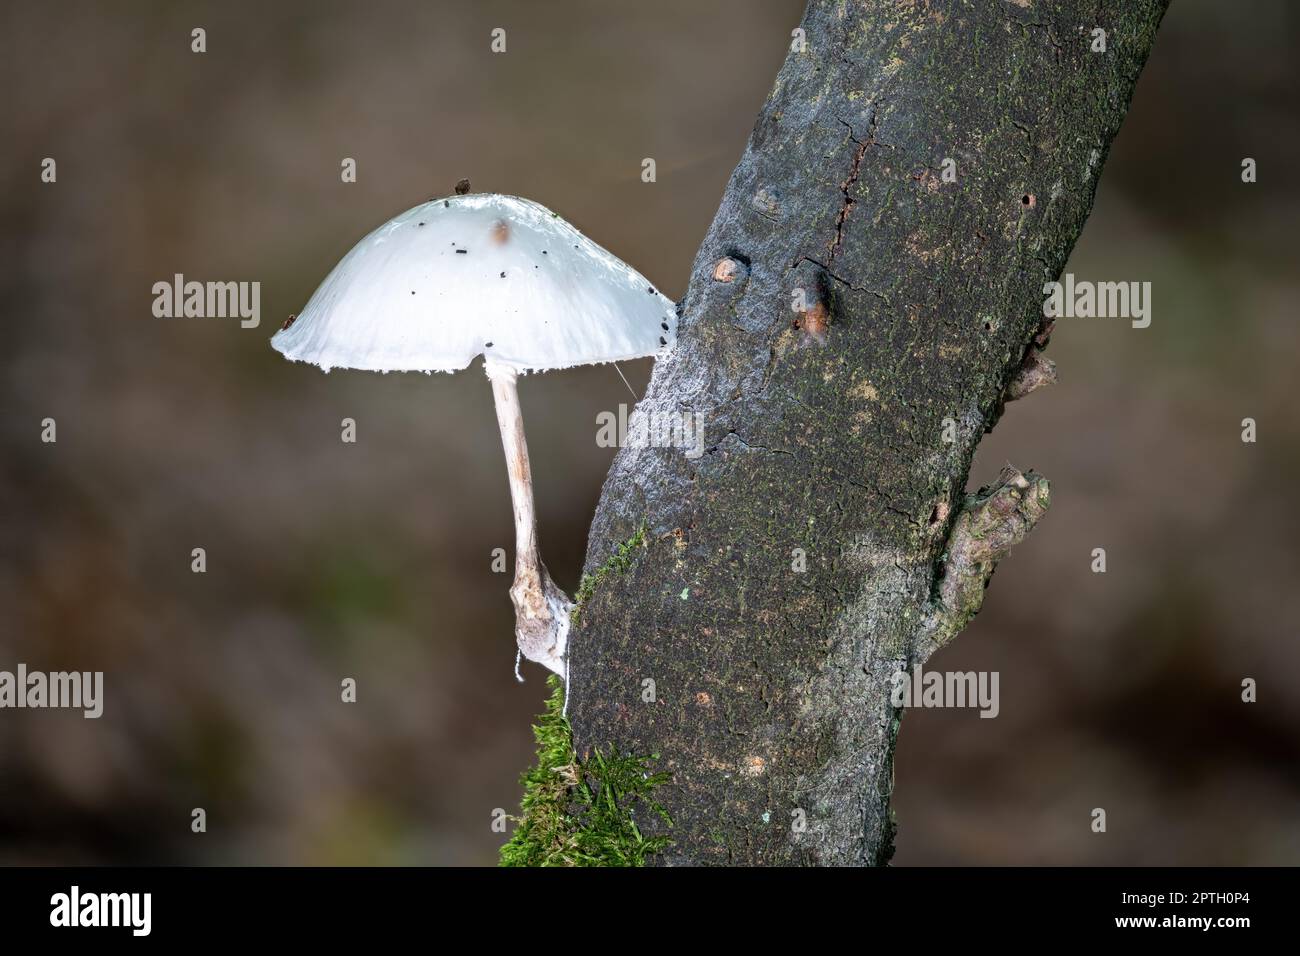 Small white milking bonnet mushroom grows diagonally from a dark branch against a blurred background Stock Photo